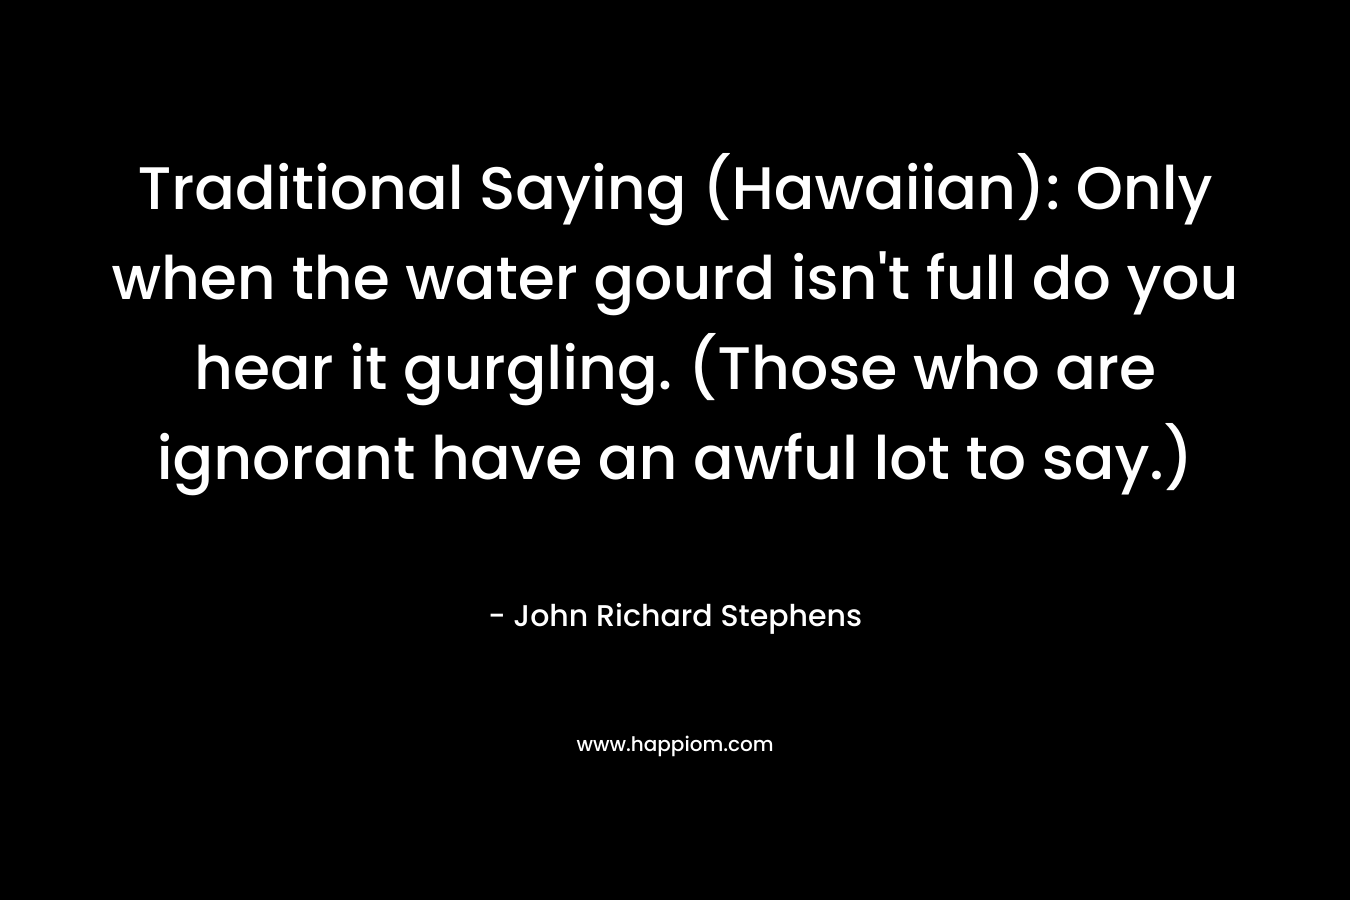 Traditional Saying (Hawaiian): Only when the water gourd isn’t full do you hear it gurgling. (Those who are ignorant have an awful lot to say.) – John Richard Stephens